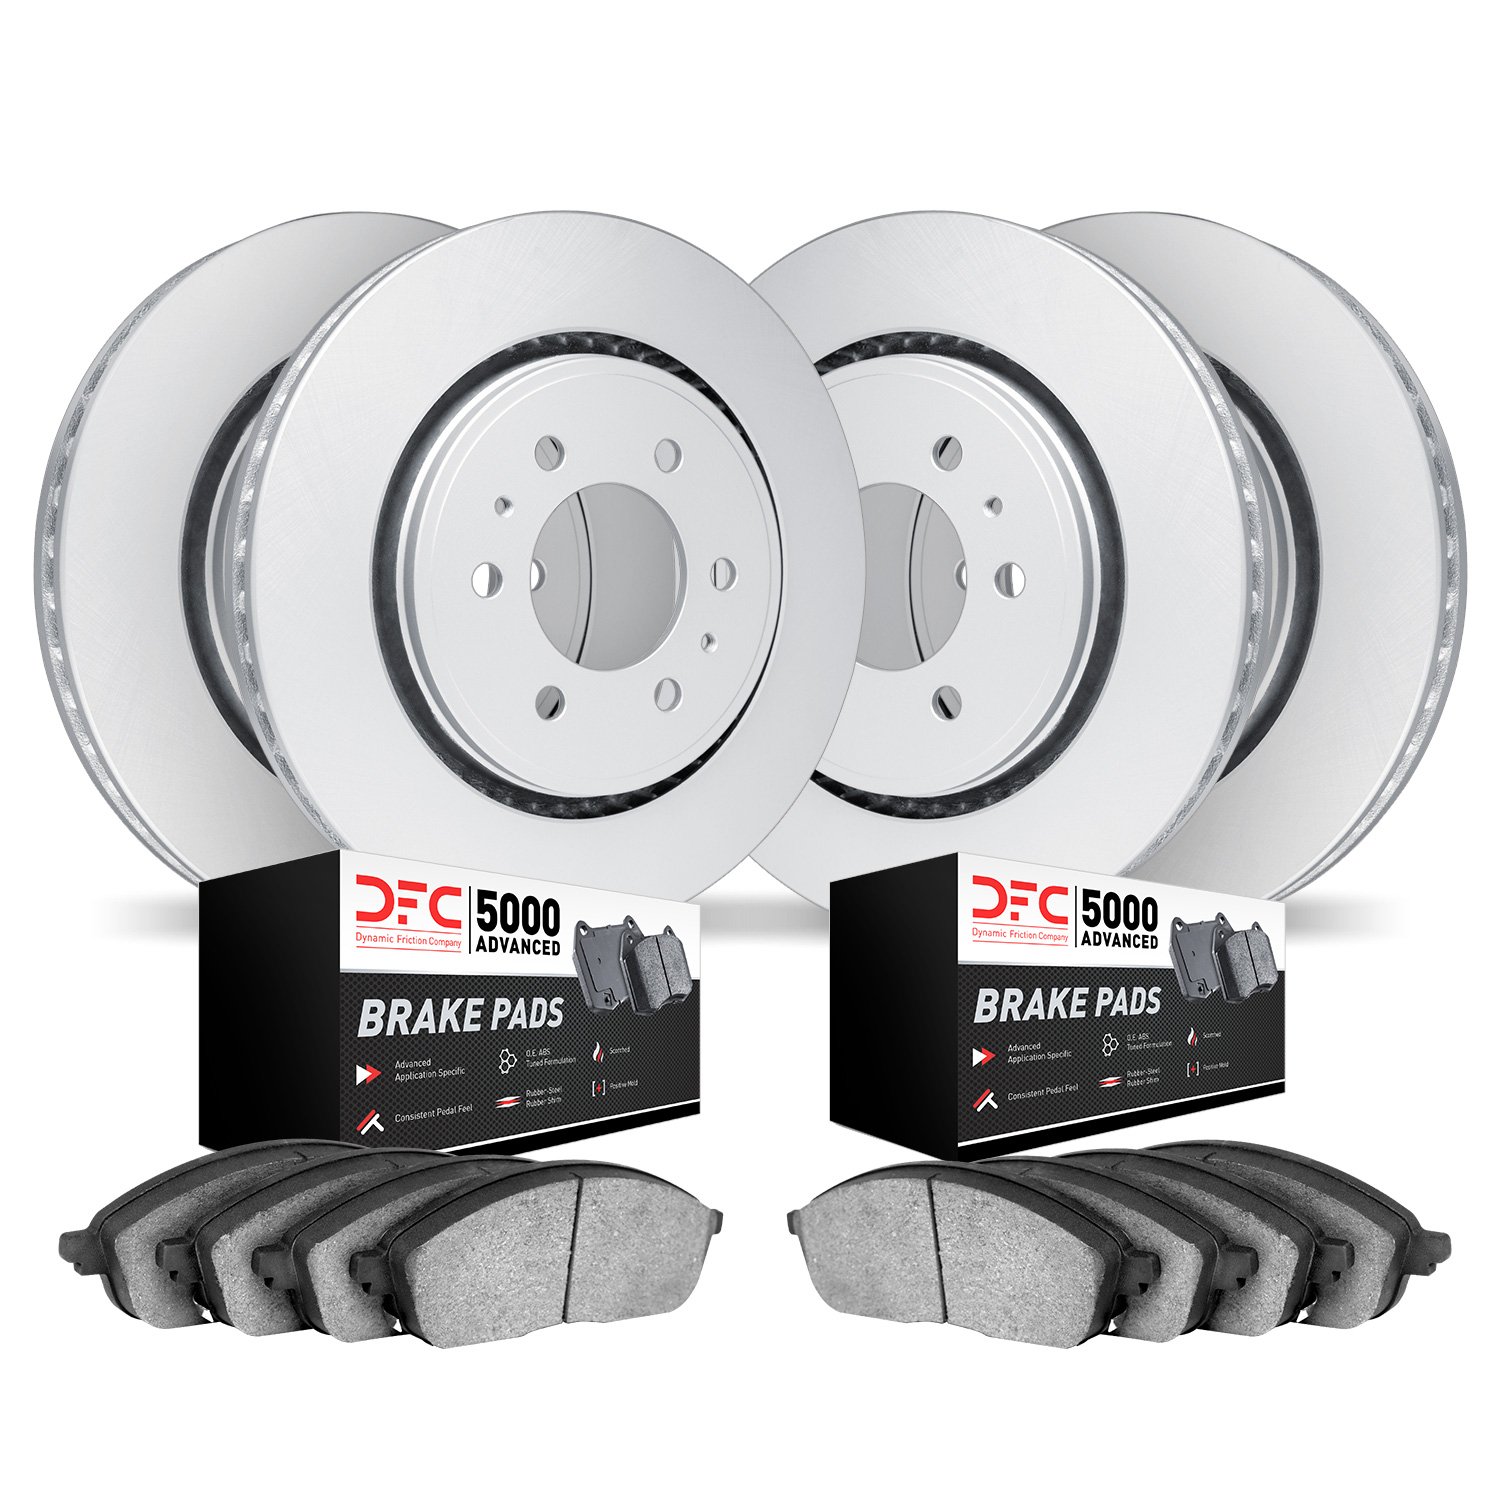 4504-54299 Geospec Brake Rotors w/5000 Advanced Brake Pads Kit, Fits Select Ford/Lincoln/Mercury/Mazda, Position: Front and Rear